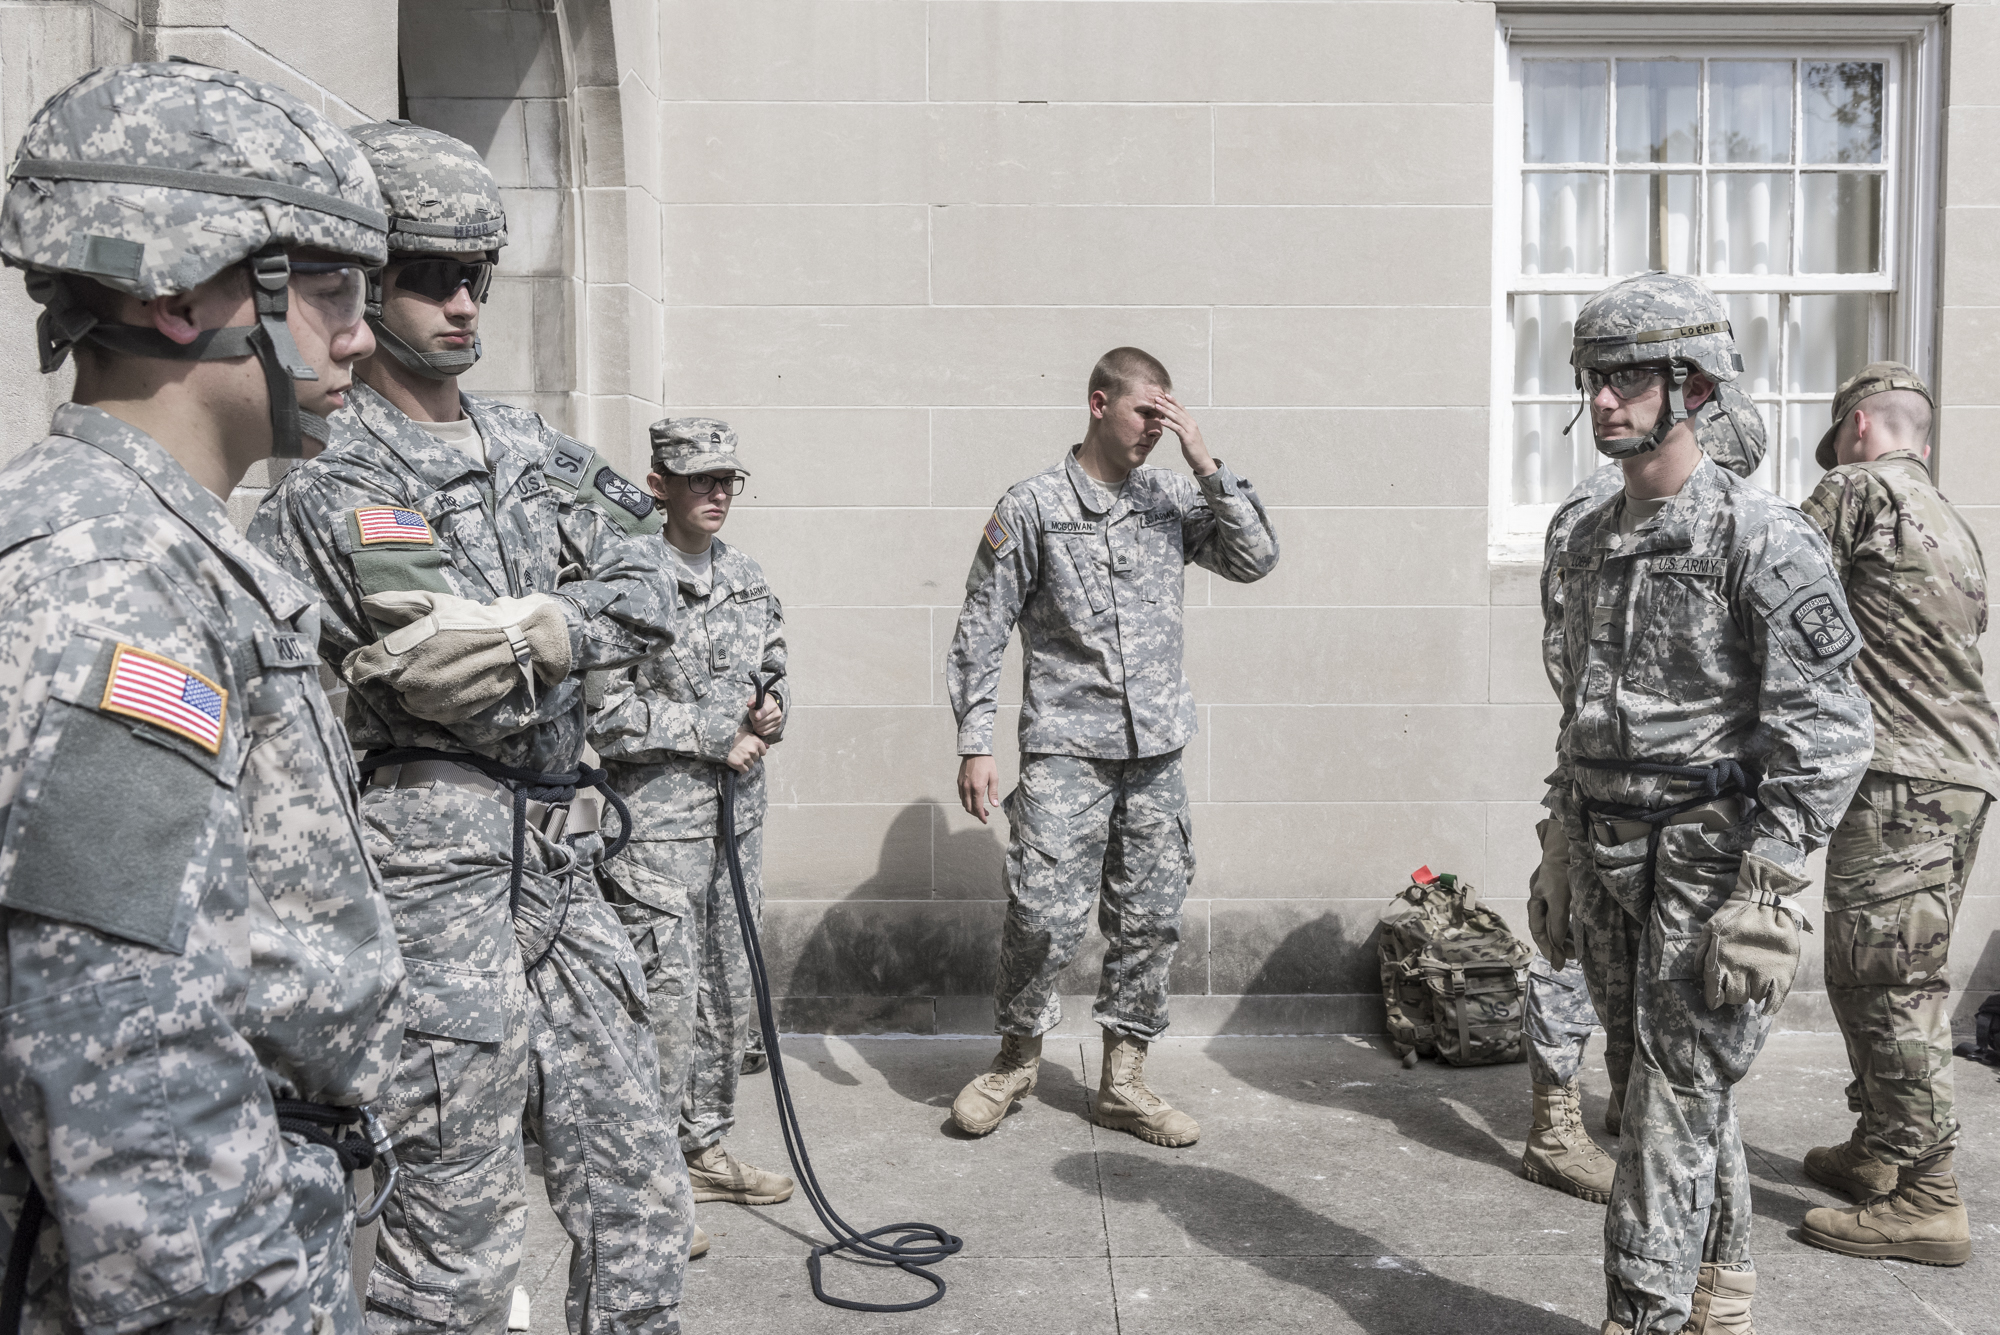  The Reserve Officers' Training Corps (ROTC) branch at Ohio University practices and teaches repelling safety outside Bentley Hall on Septmeber 20, 2017. 